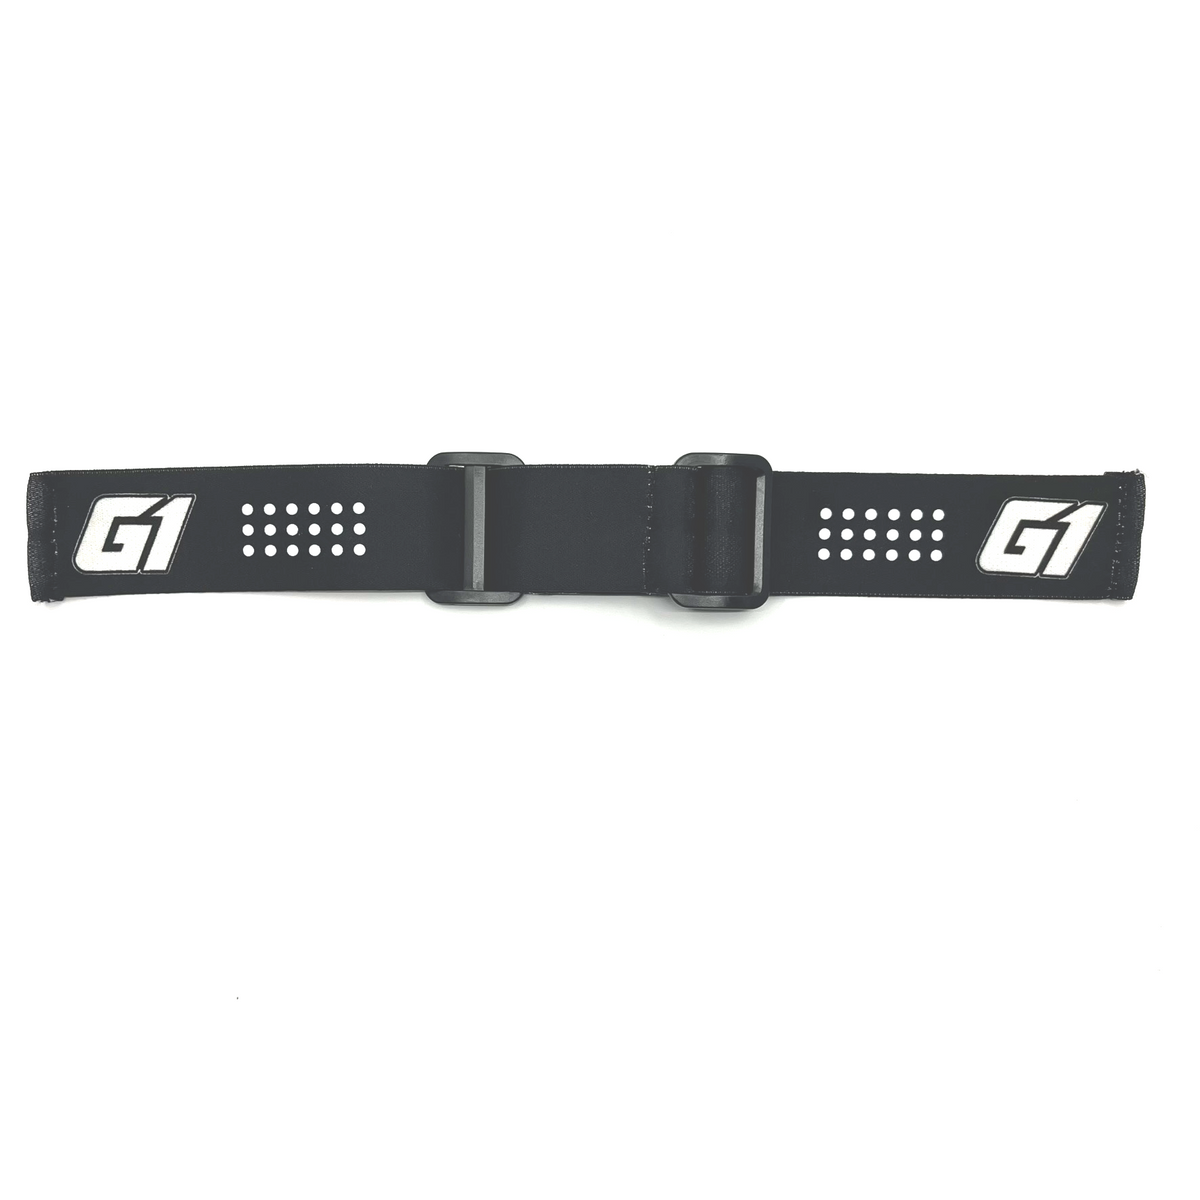 G1 Goggle Strap – G1 PAINTBALL™